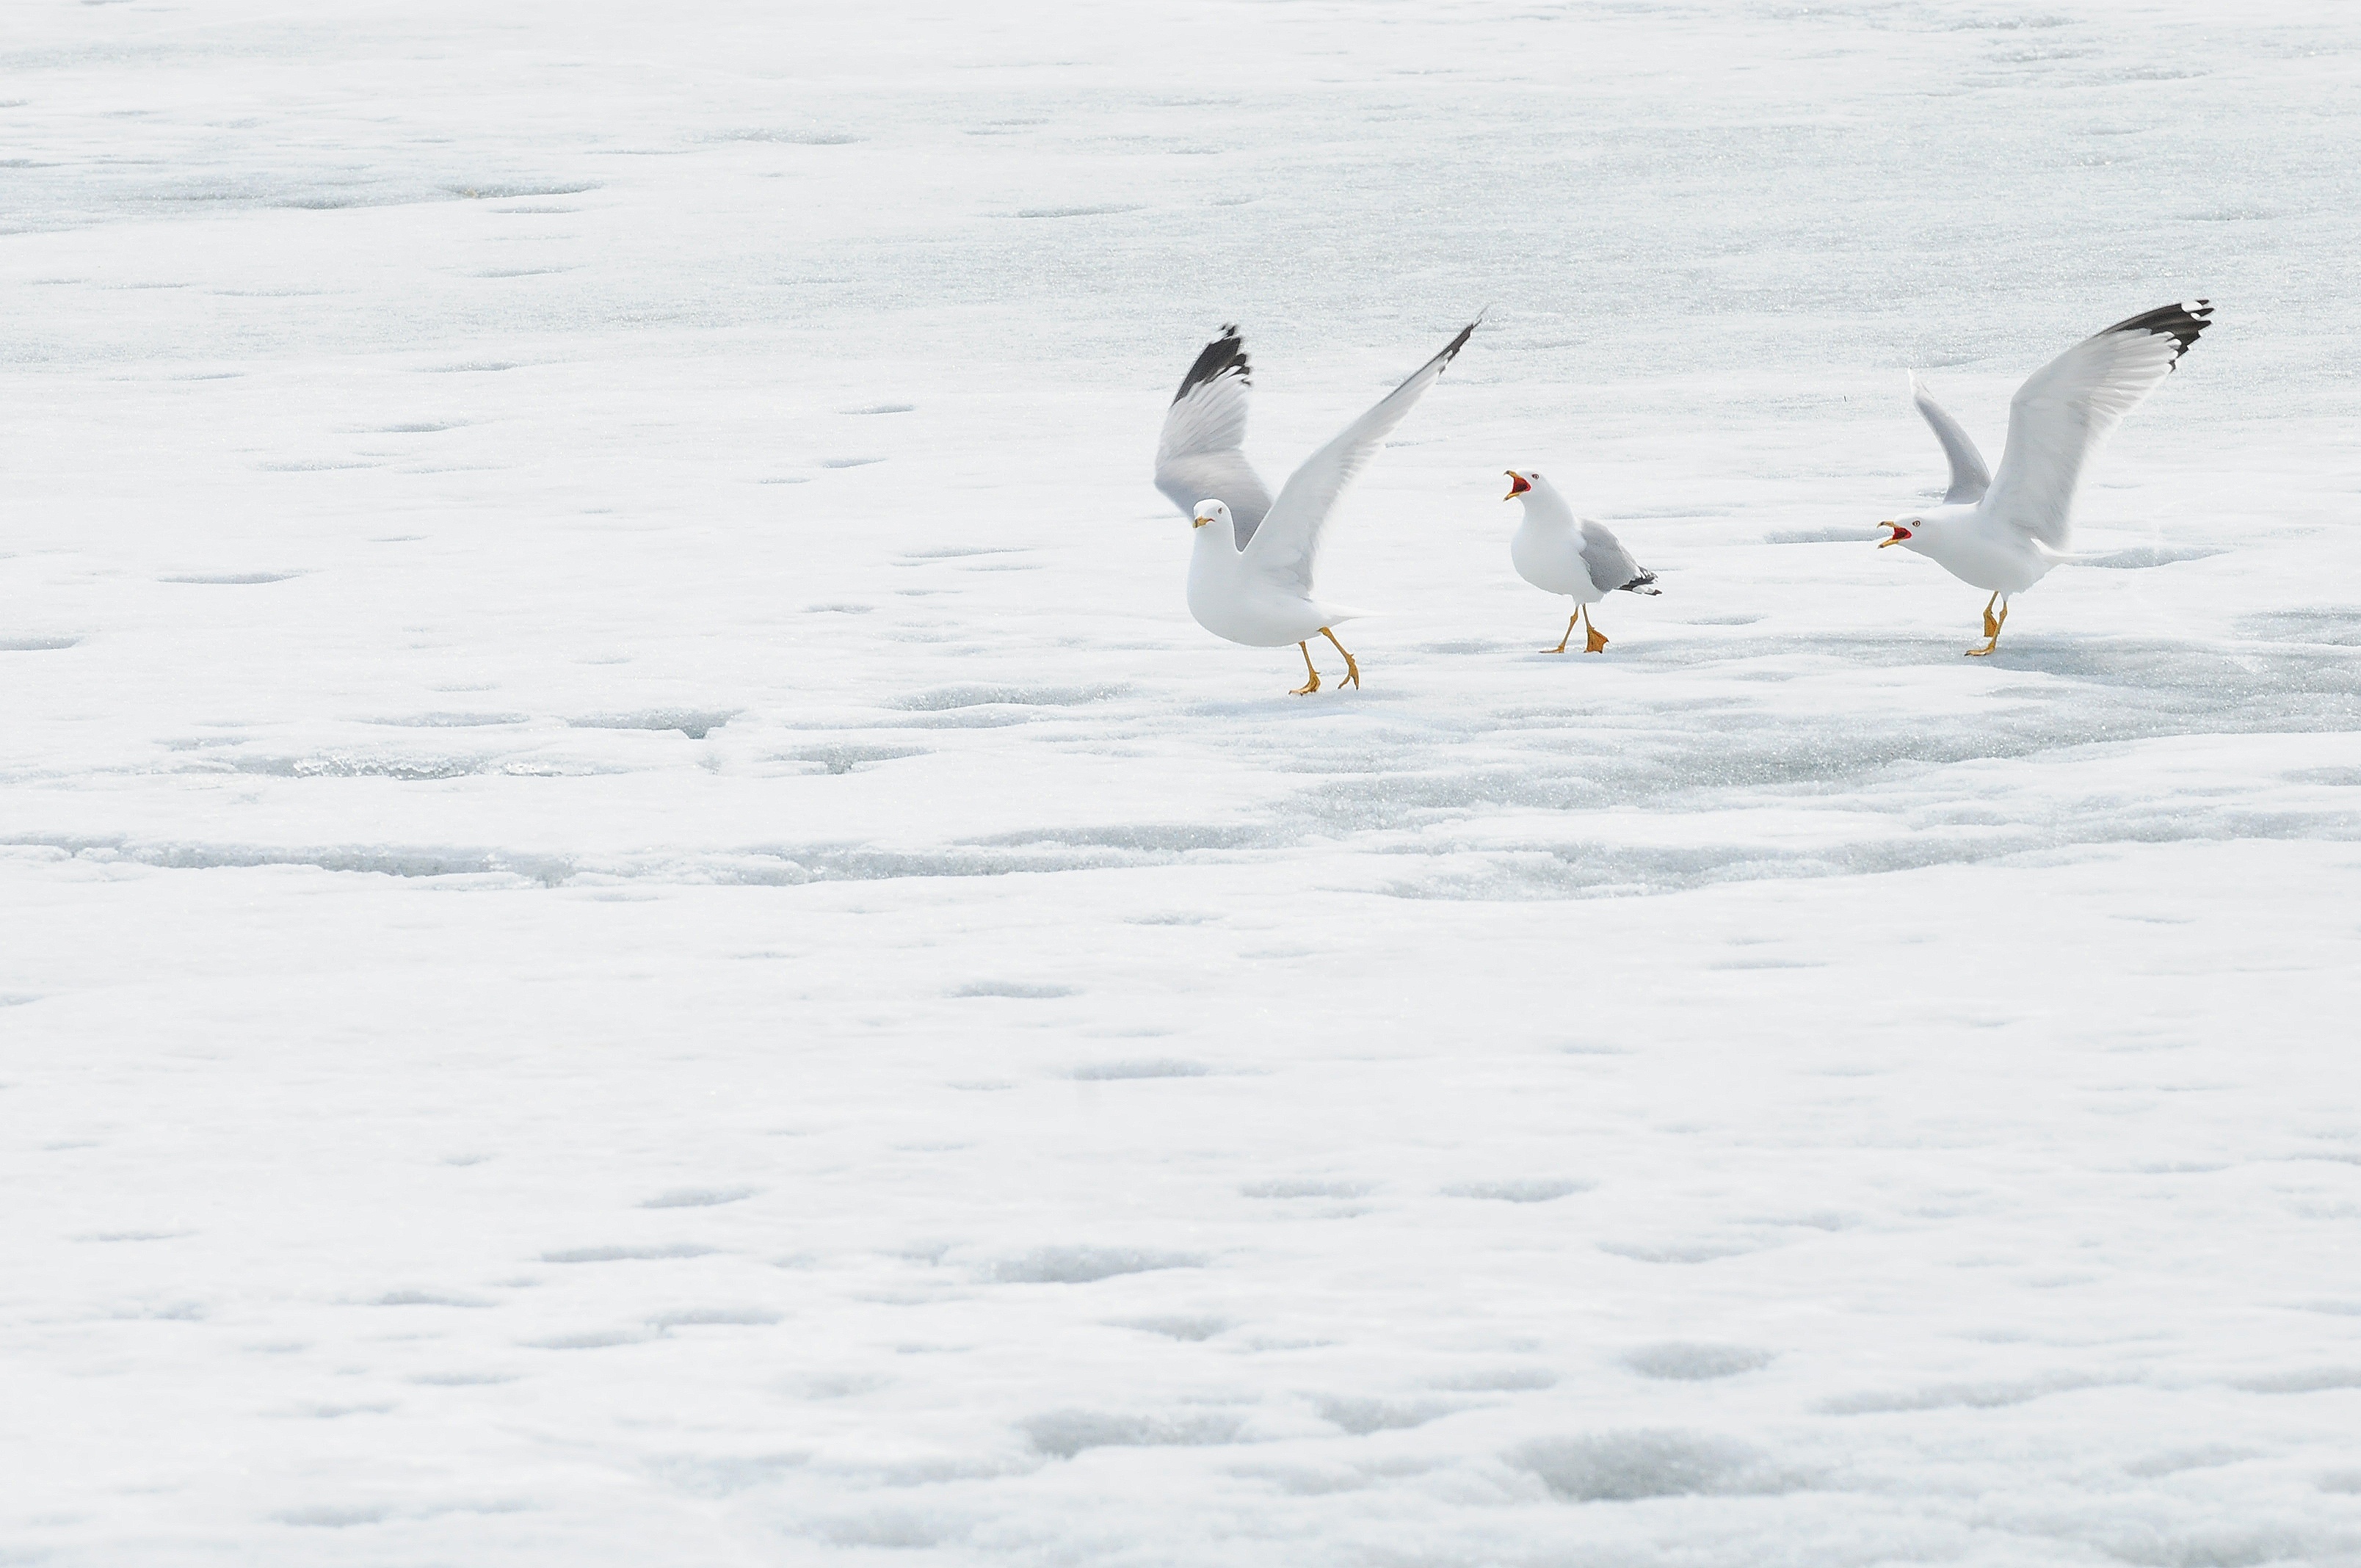 CAREFULLY- Three seagulls made their way across a frozen pond recently walking slowly as if not to crack the ice.